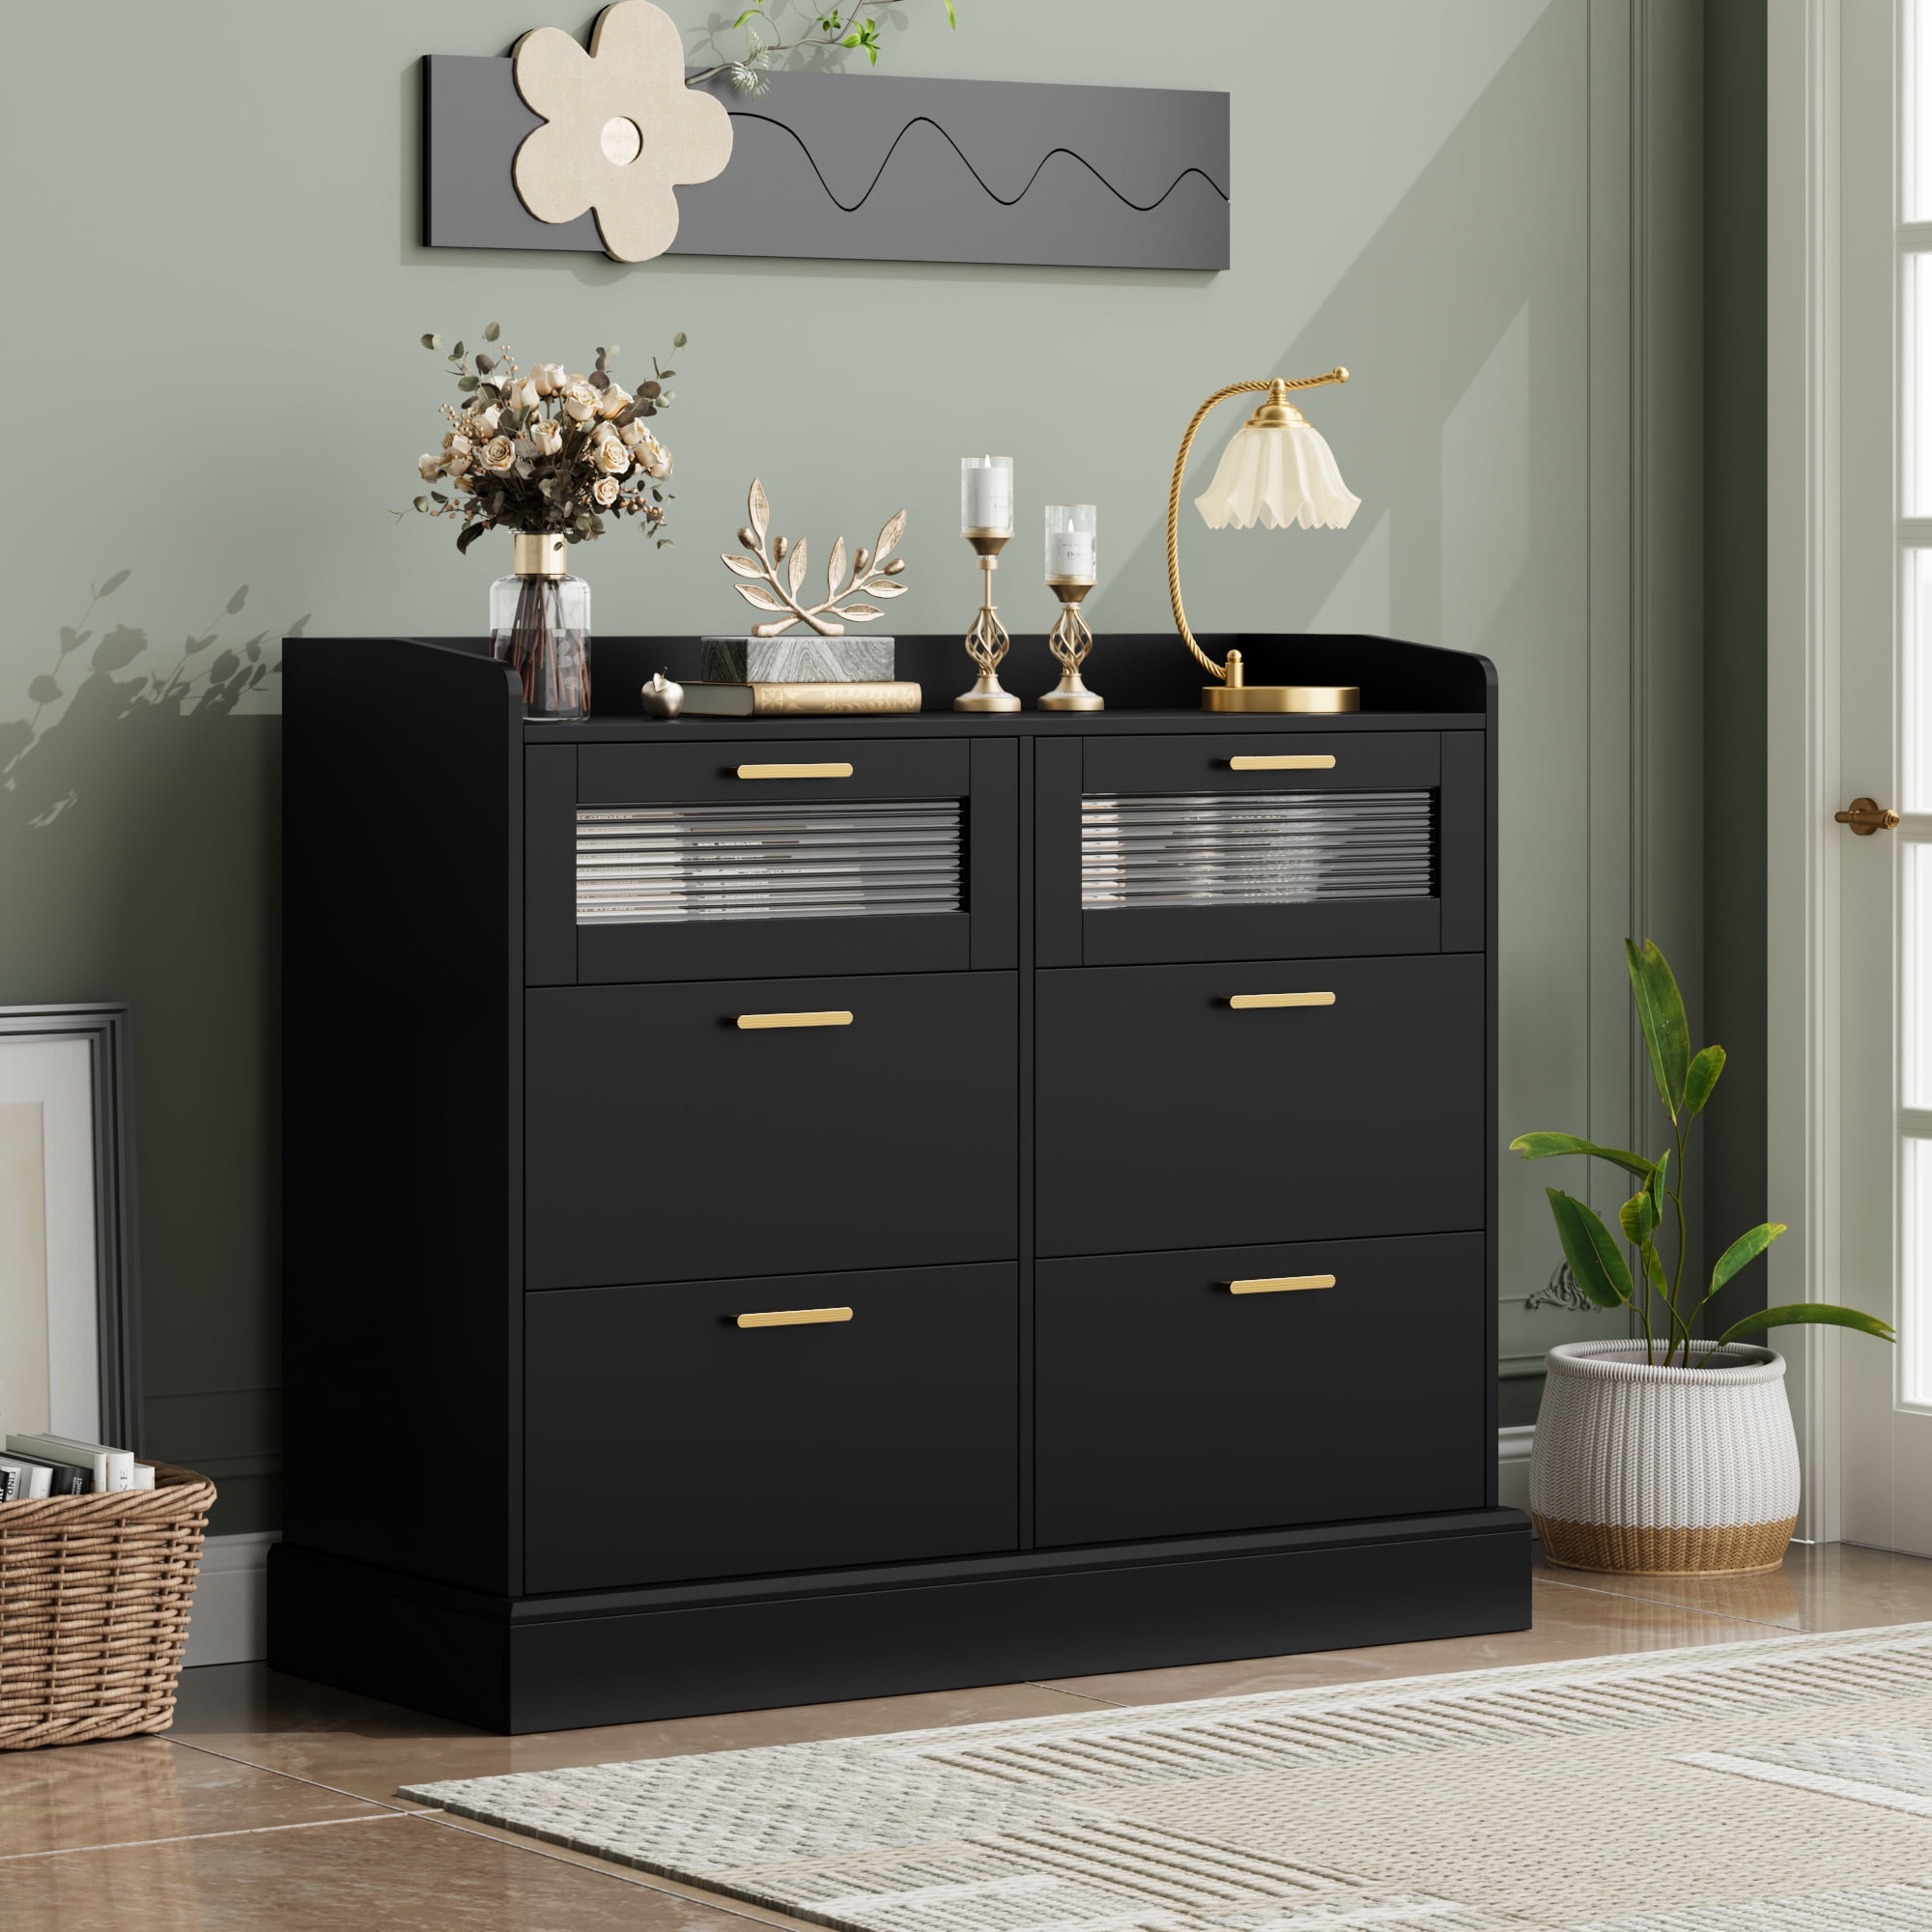 Homfa 6 Drawer Double Dresser with Fence, Chest of Drawers with Wavy Glass, Wooden Storage Cabinet for Bedroom, Black - image 1 of 7